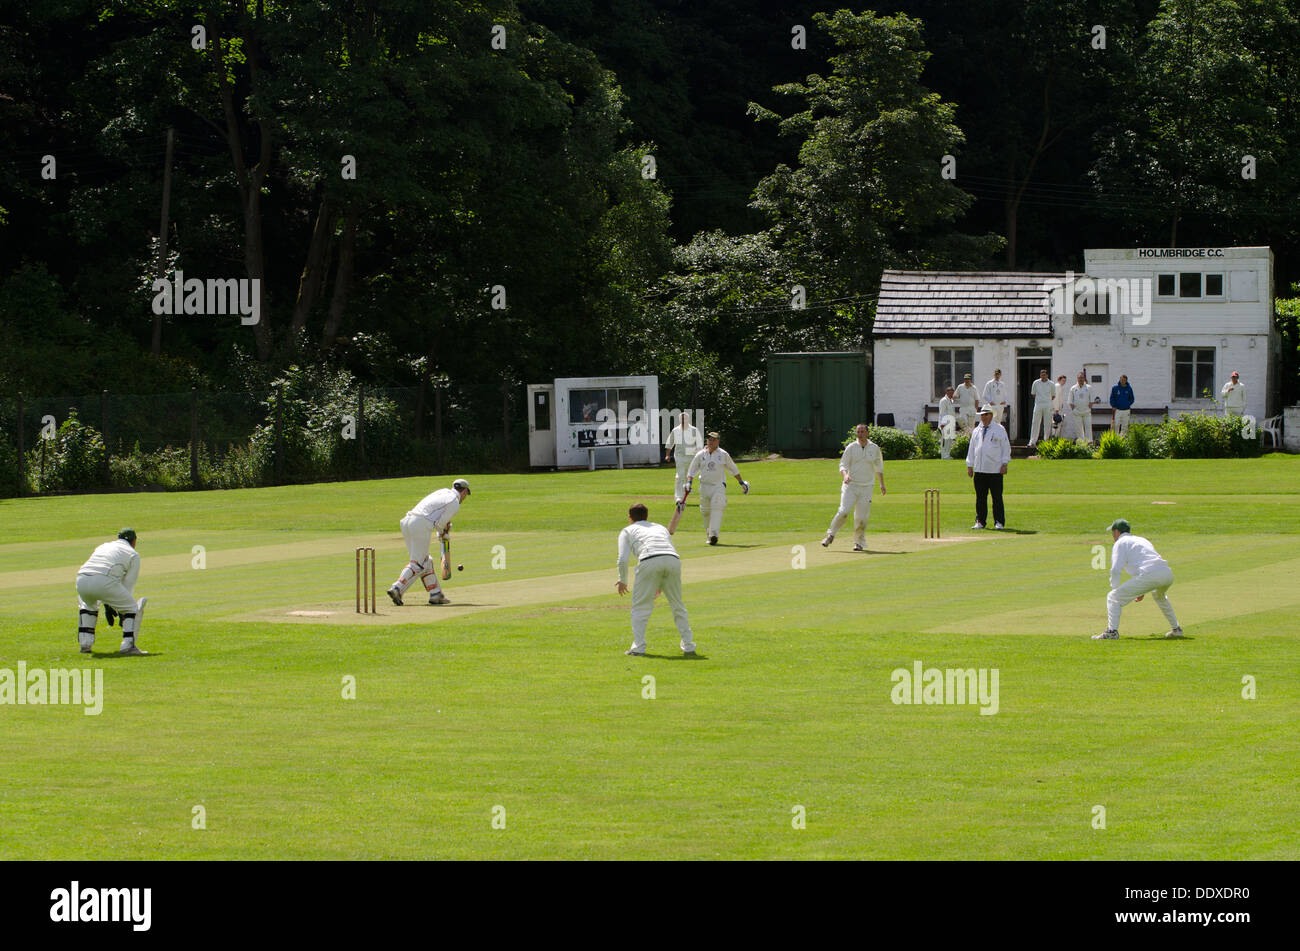 Village cricket scene at Holmbridge Cricket Club in West Yorkshire showing the clubhouse in the background Stock Photo